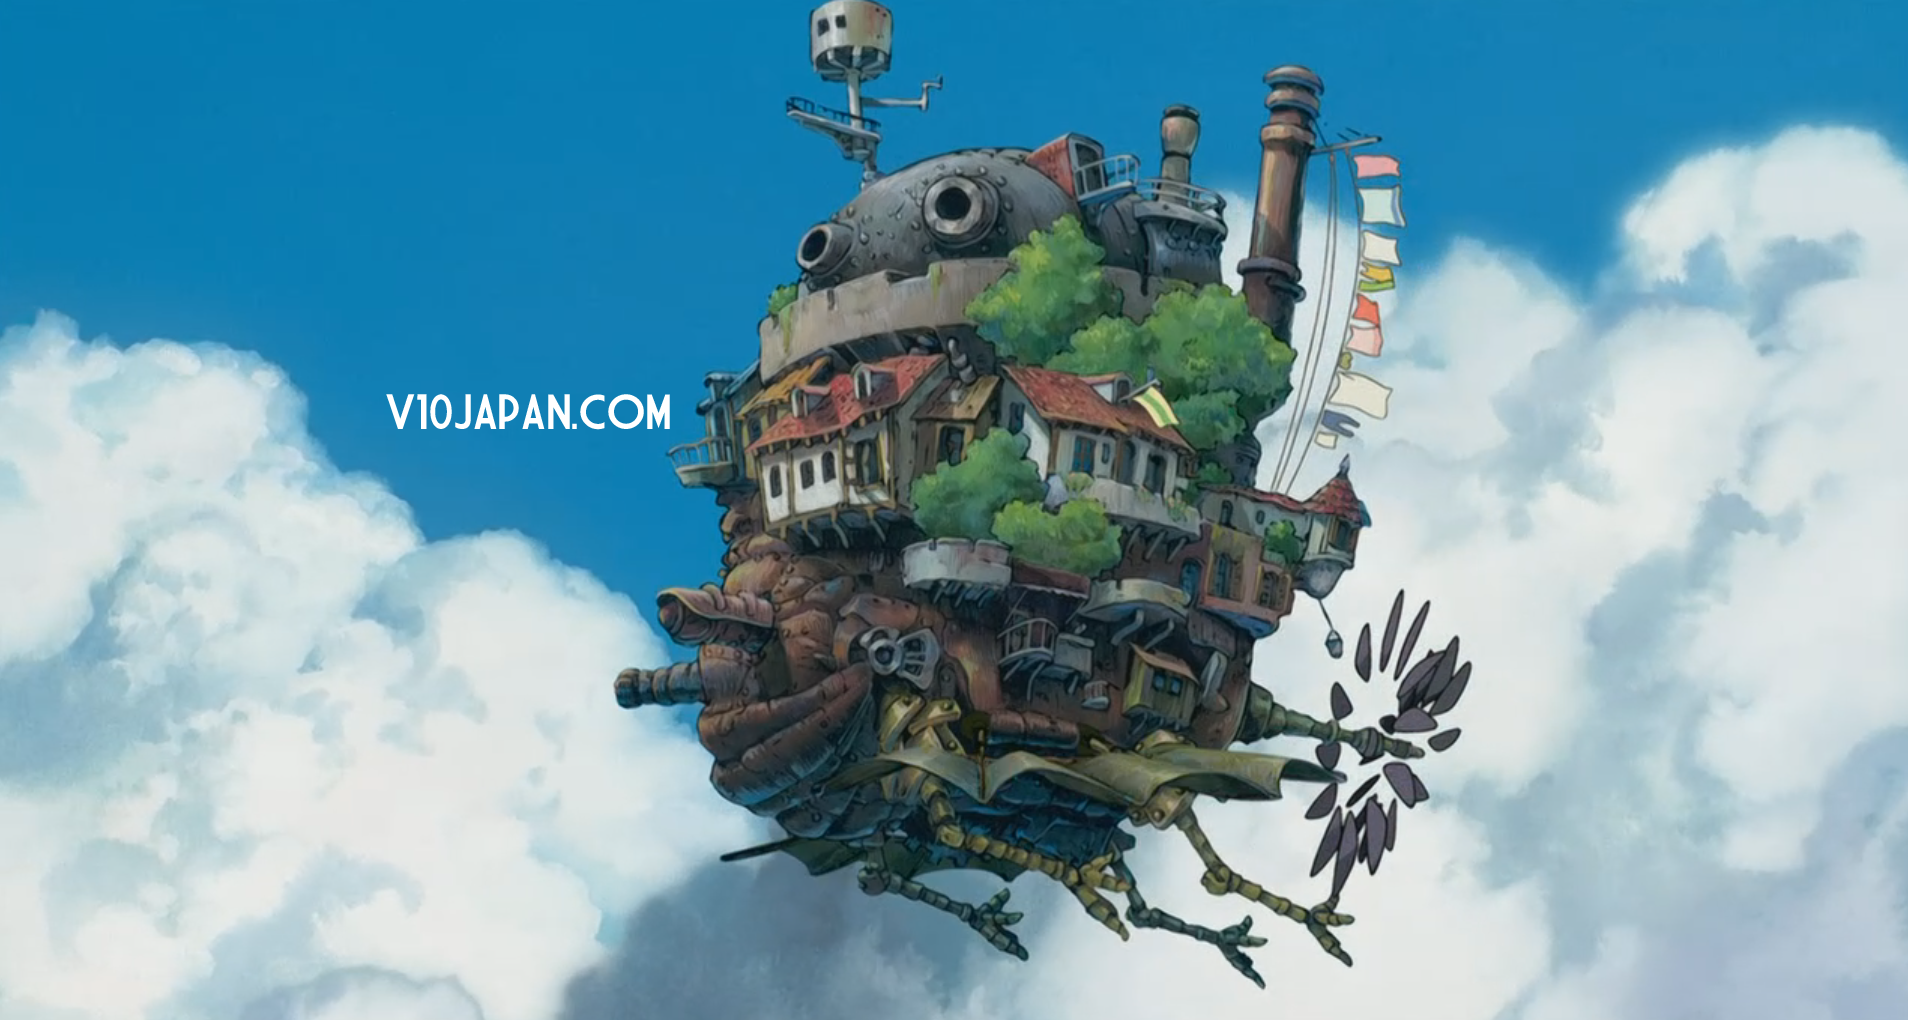 Amazing Howl's Moving Castle Pictures & Backgrounds